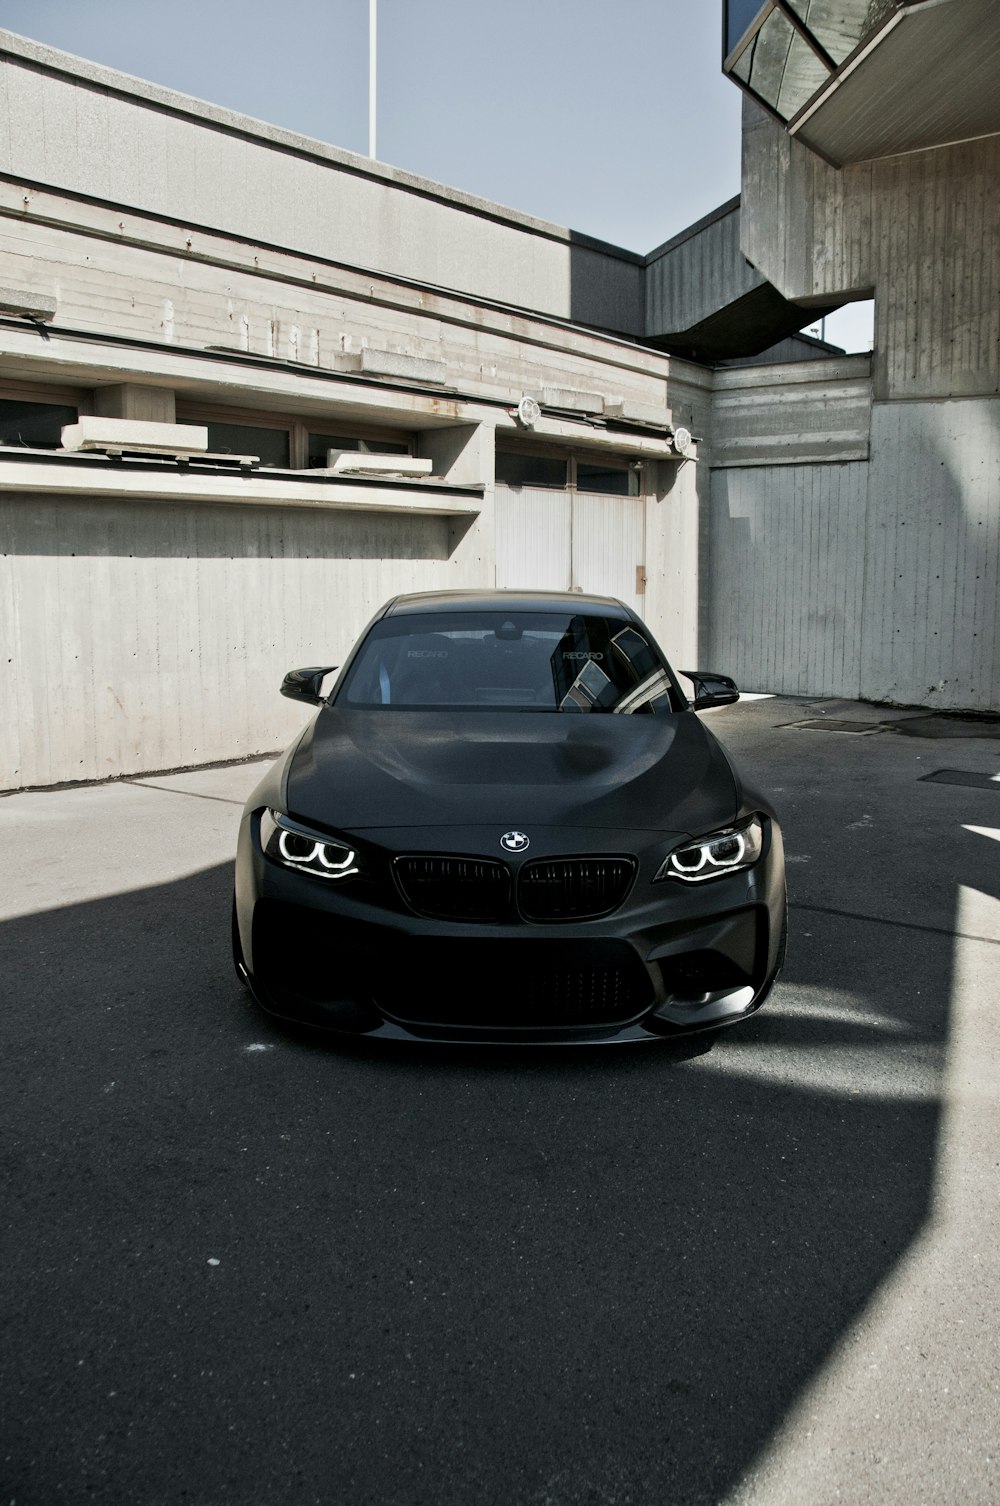 black bmw car parked on gray concrete floor during daytime